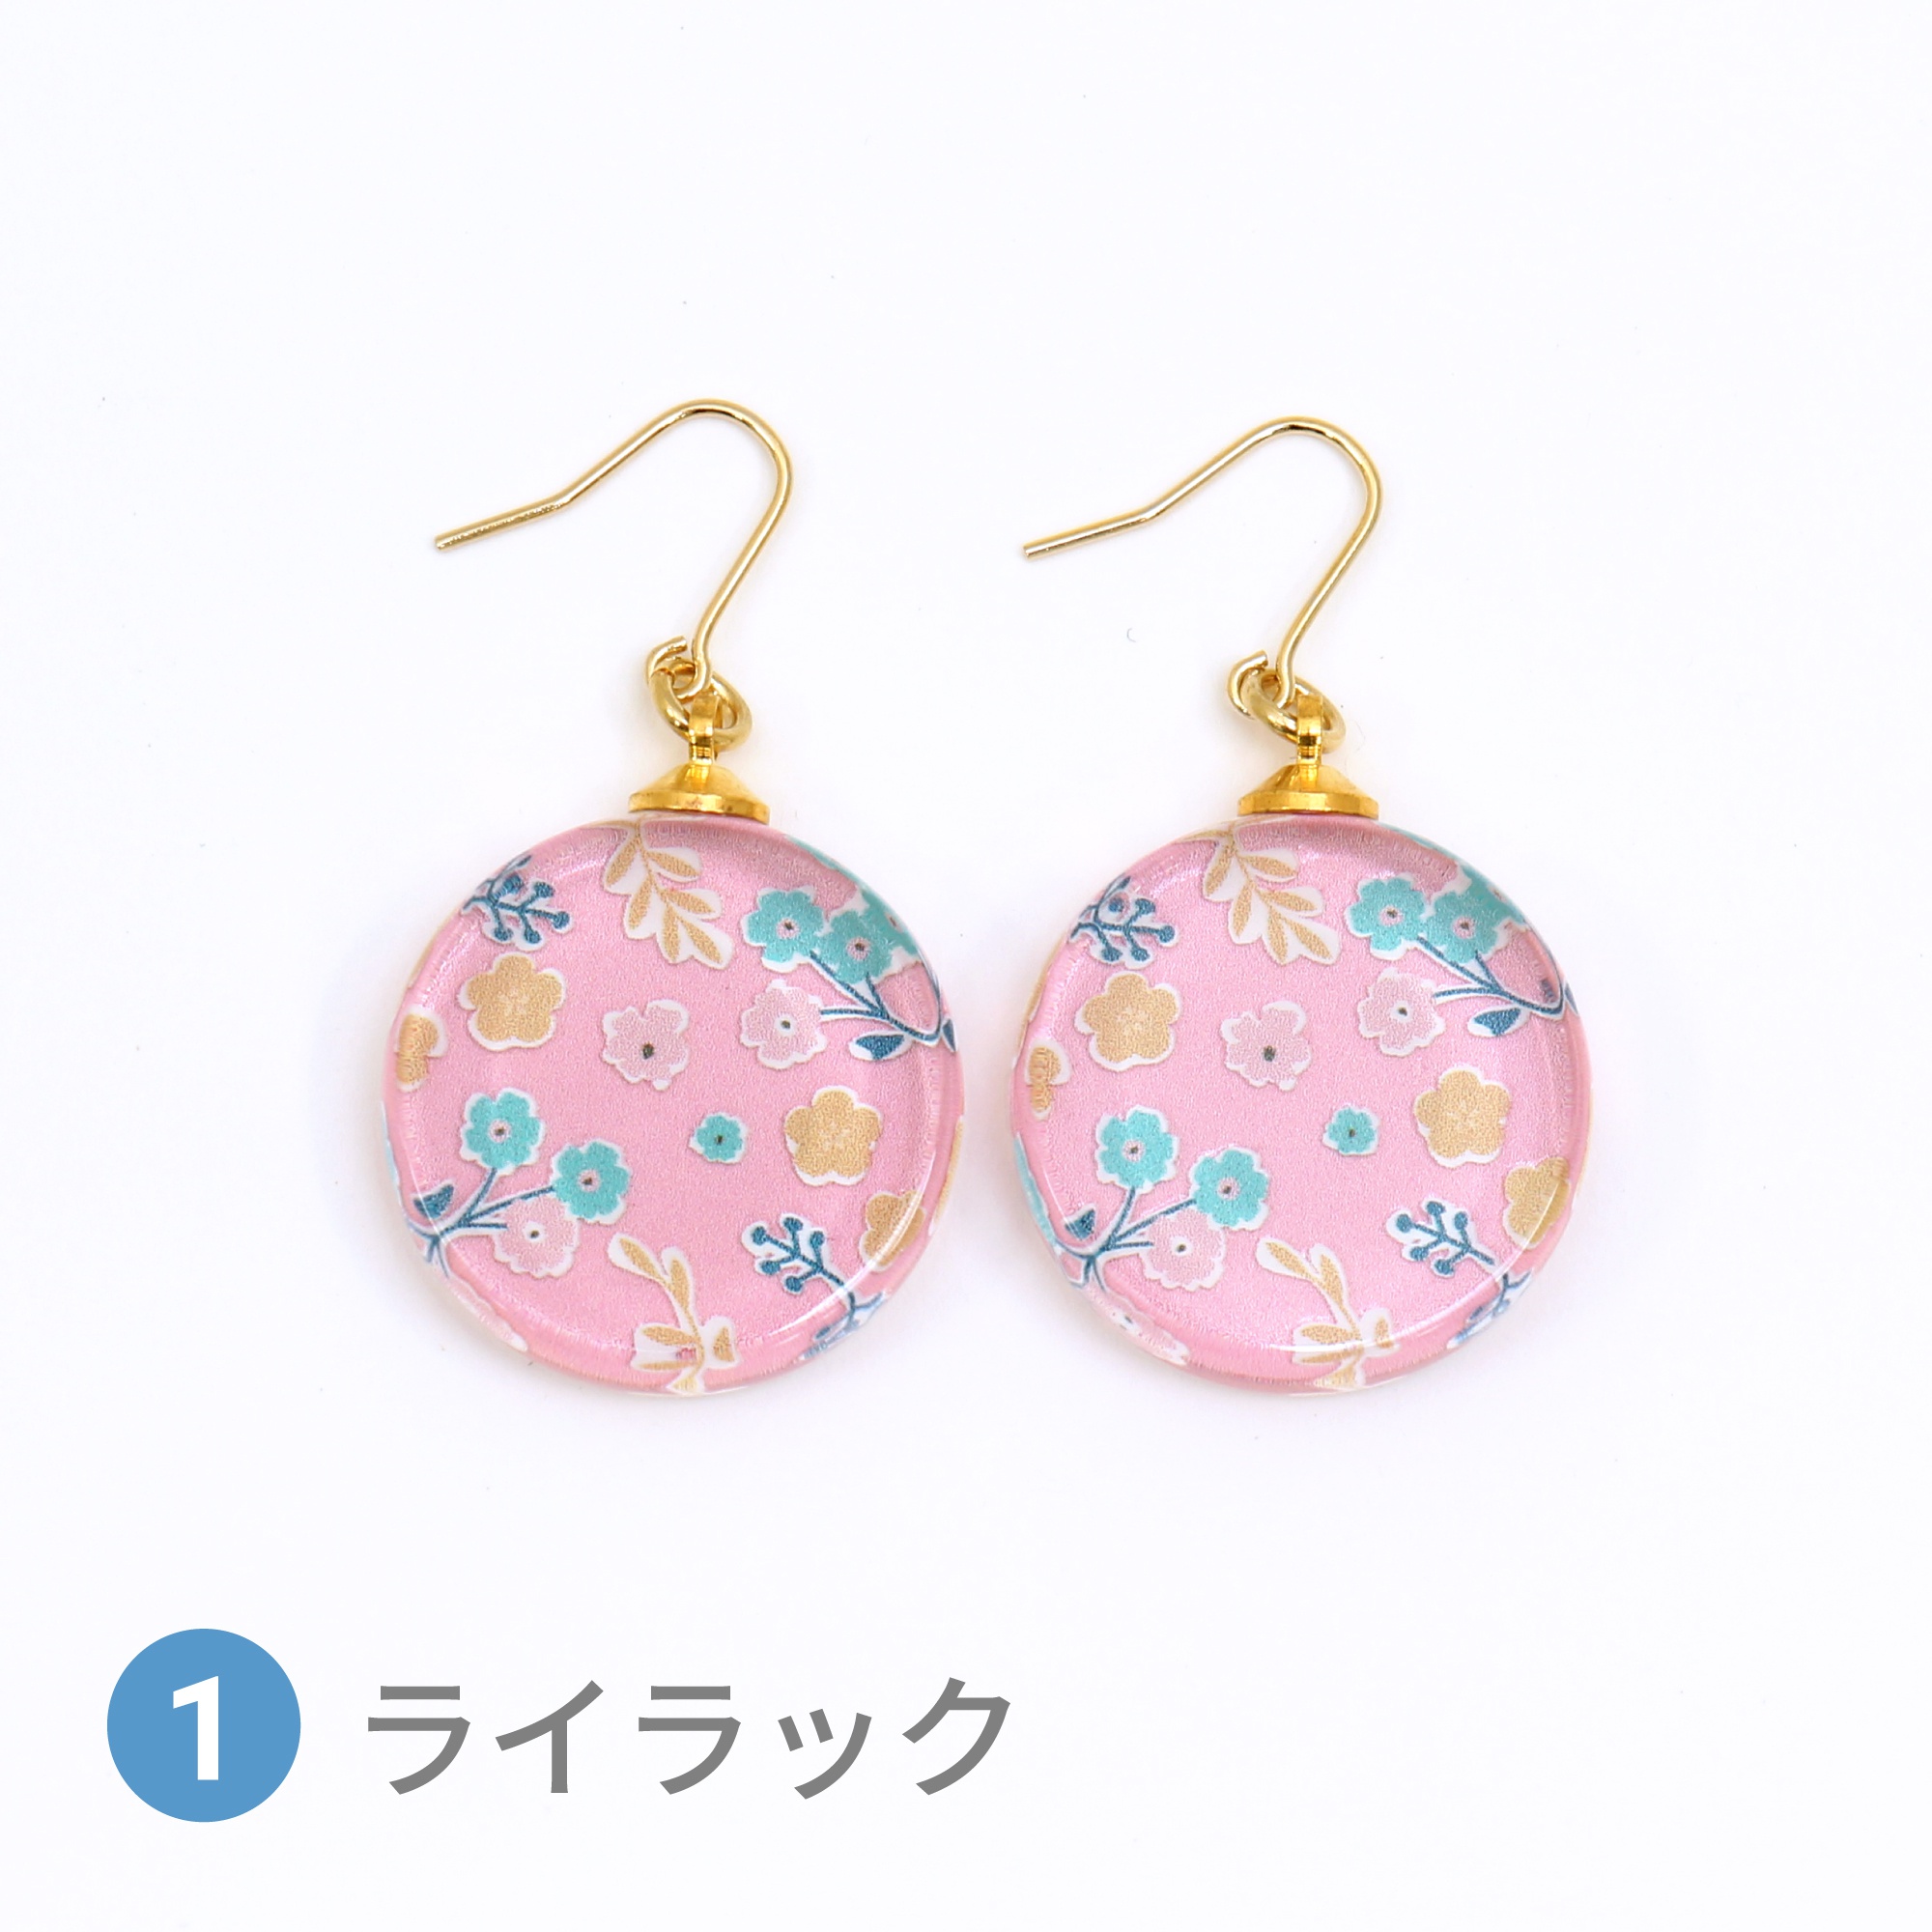 Glass accessories Pierced Earring FLORAL PATTERN lilac round shape